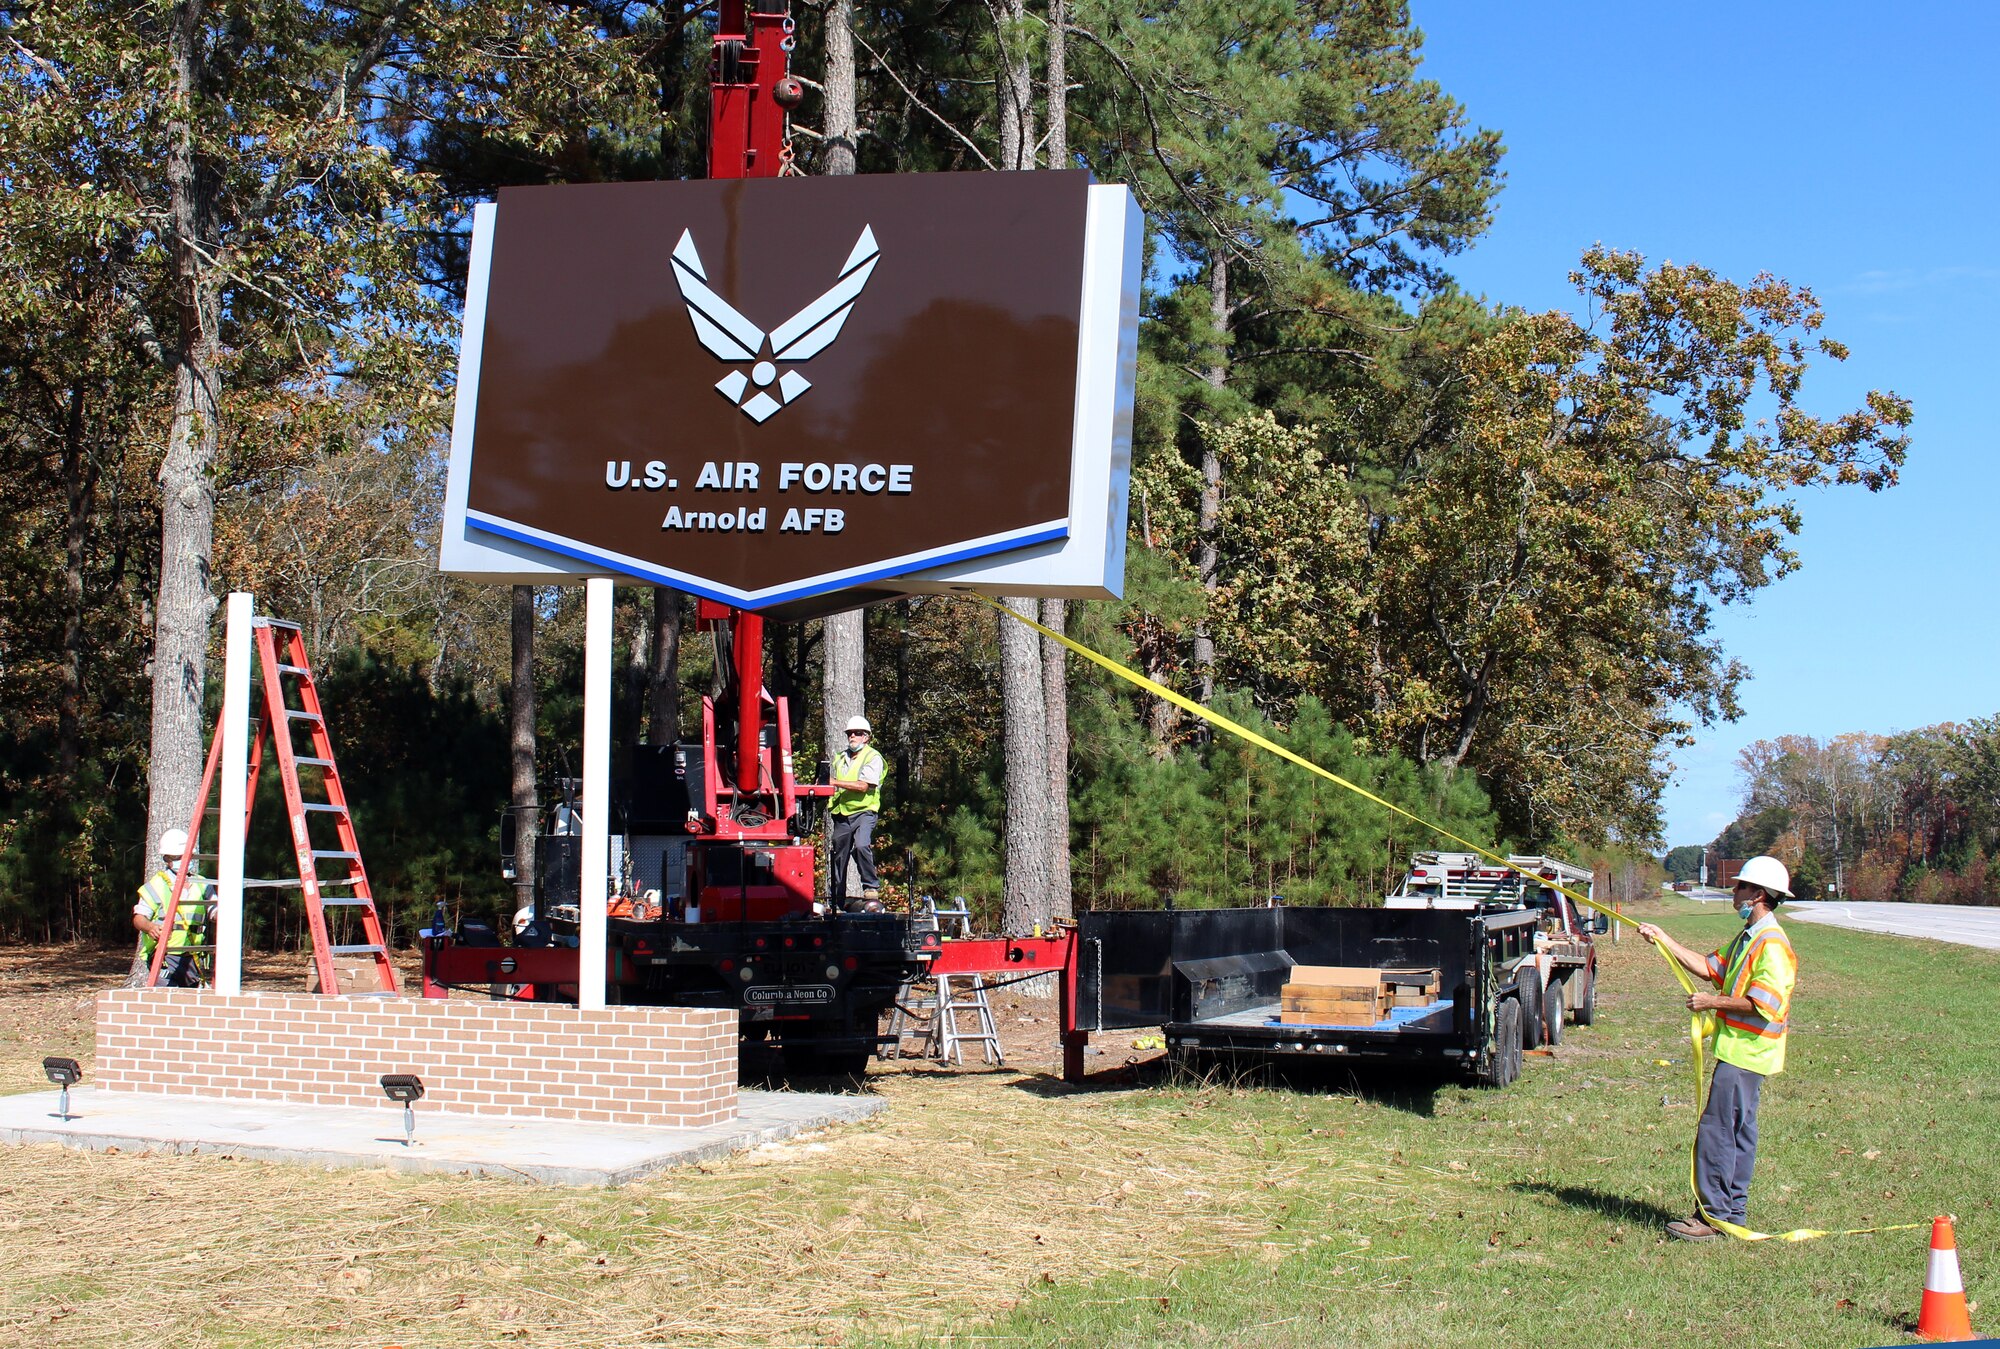 The new sign at the Main Gate at Arnold Air Force Base, Tenn., is installed Oct. 22, 2020. Located alongside Wattendorf Highway before entering the base, the new sign was necessary after an accident occurred in February 2020, in which a car ran off the roadway and collided with the previous sign. The project was completed by the Simplified Acquisition Base Engineering Requirements (SABER) contractor, SDVE, LLC. (U.S. Air Force photo by Deidre Moon)